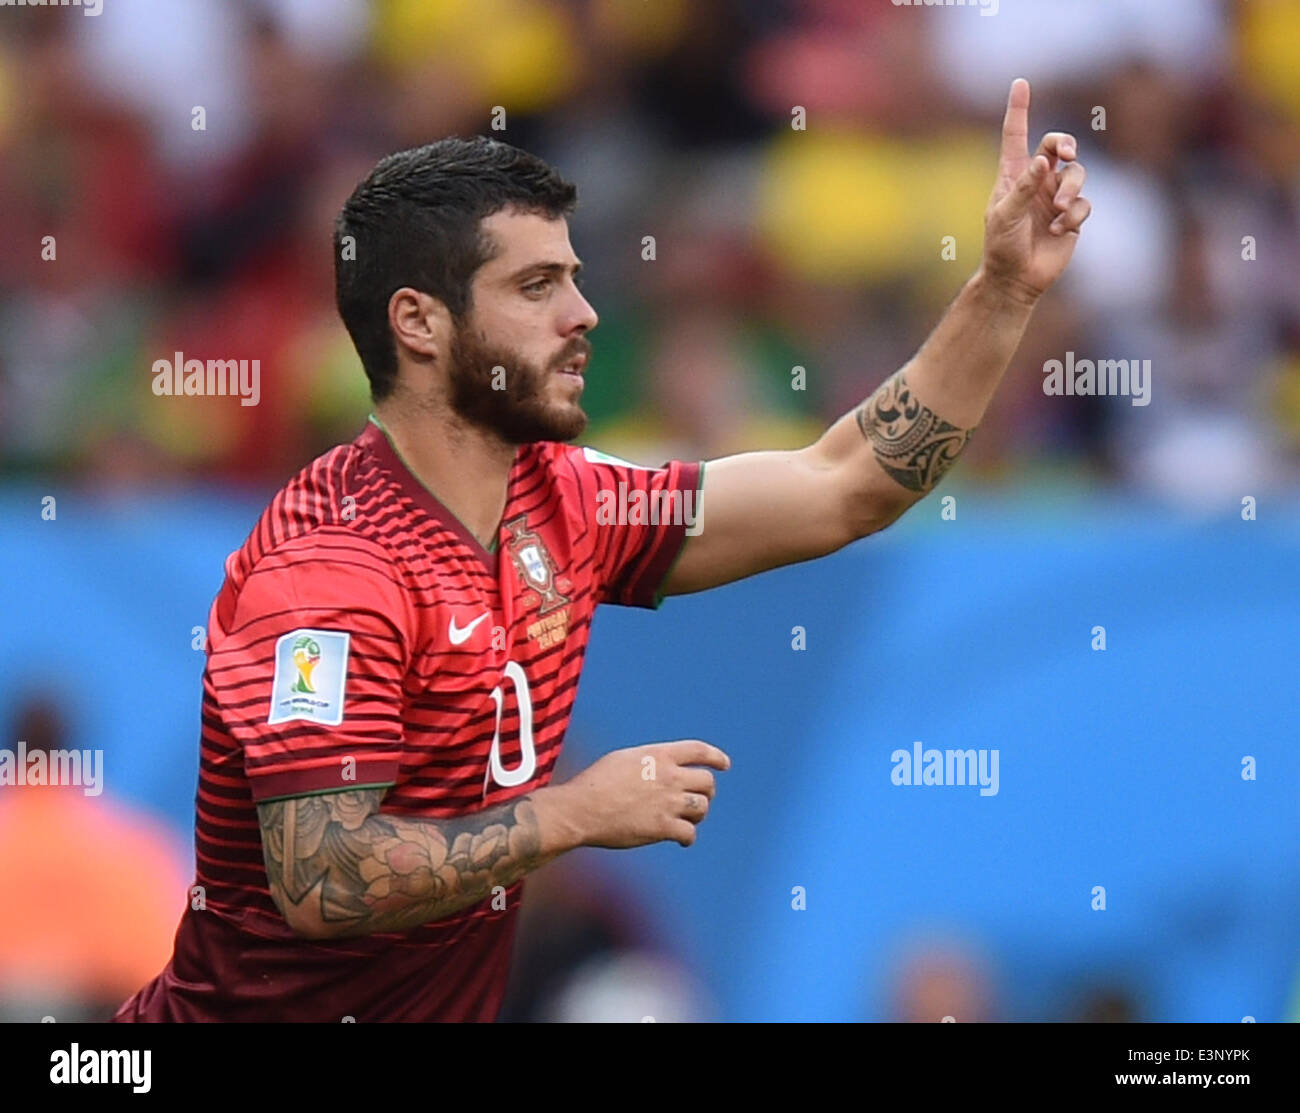 Brasilia, Brazil. 26th June, 2014. Vieirinha of Portugal reacts during the FIFA World Cup 2014 group G preliminary round match between Portugal and Ghana at the Estadio National Stadium in Brasilia, Brazil, on 26 June 2014 Credit: © dpa picture alliance/Alamy Live News  Stock Photo